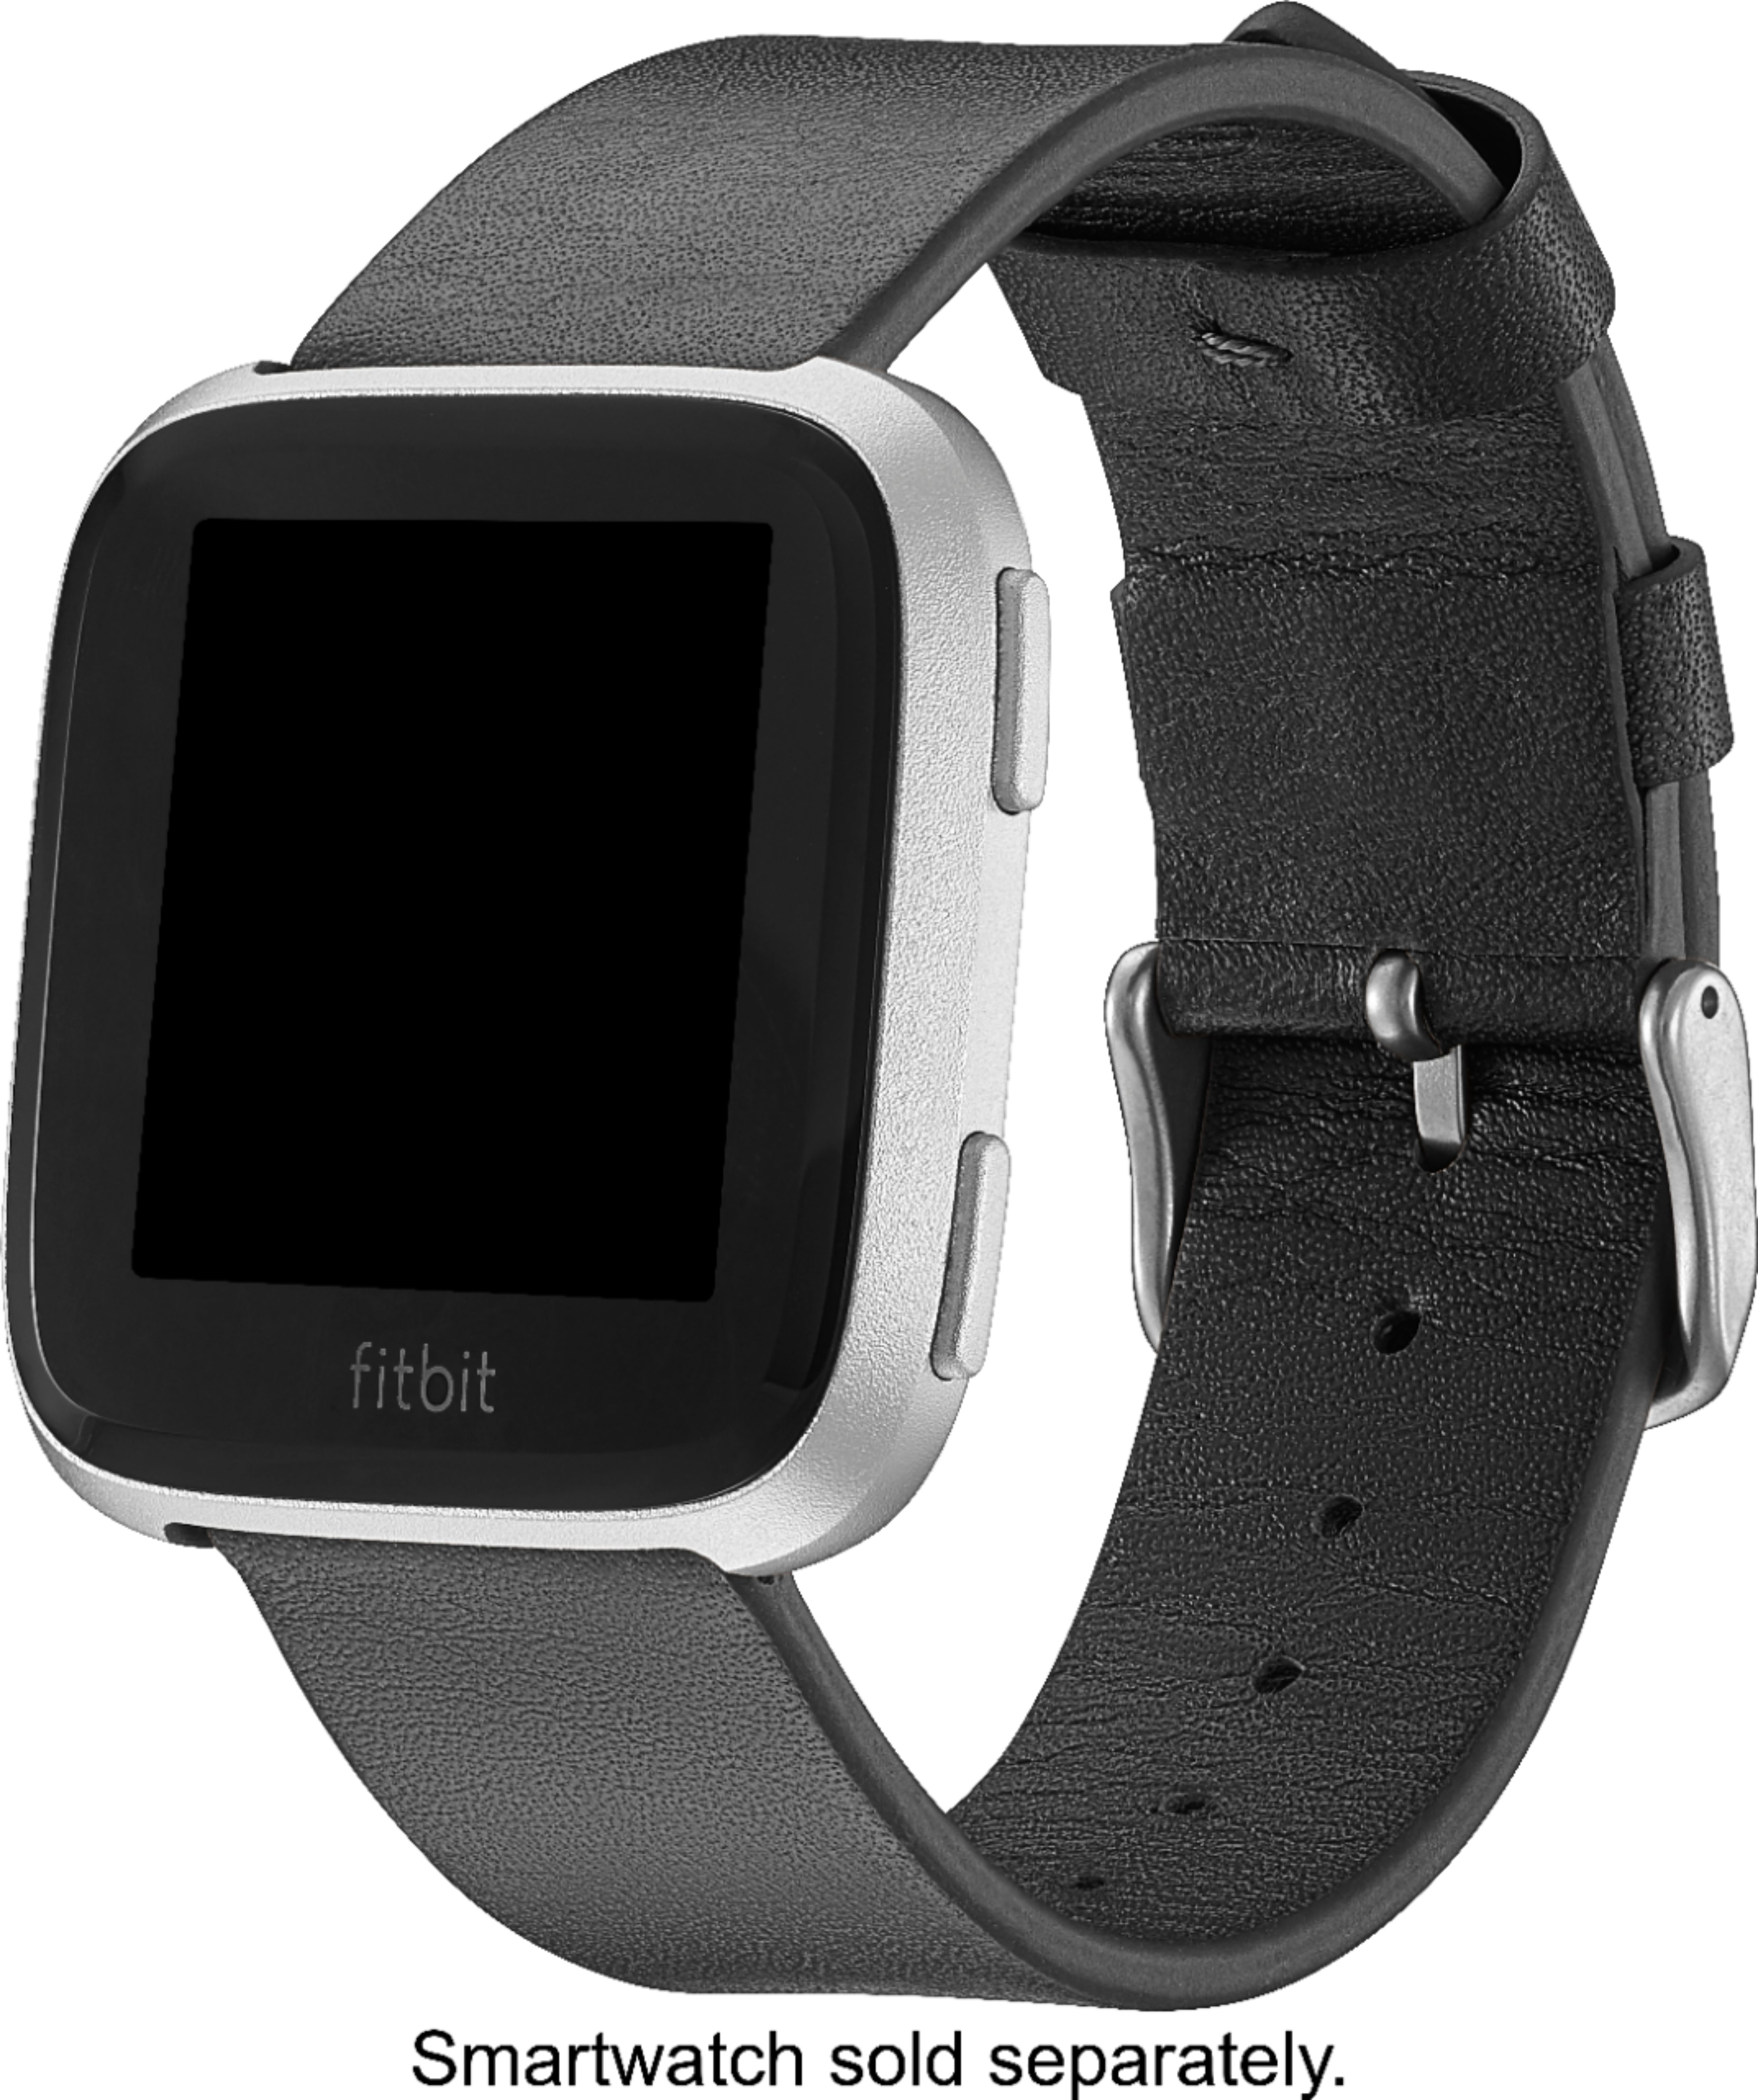 Customer Reviews: Platinum™ Horween Leather Watch Band for Fitbit Versa ...